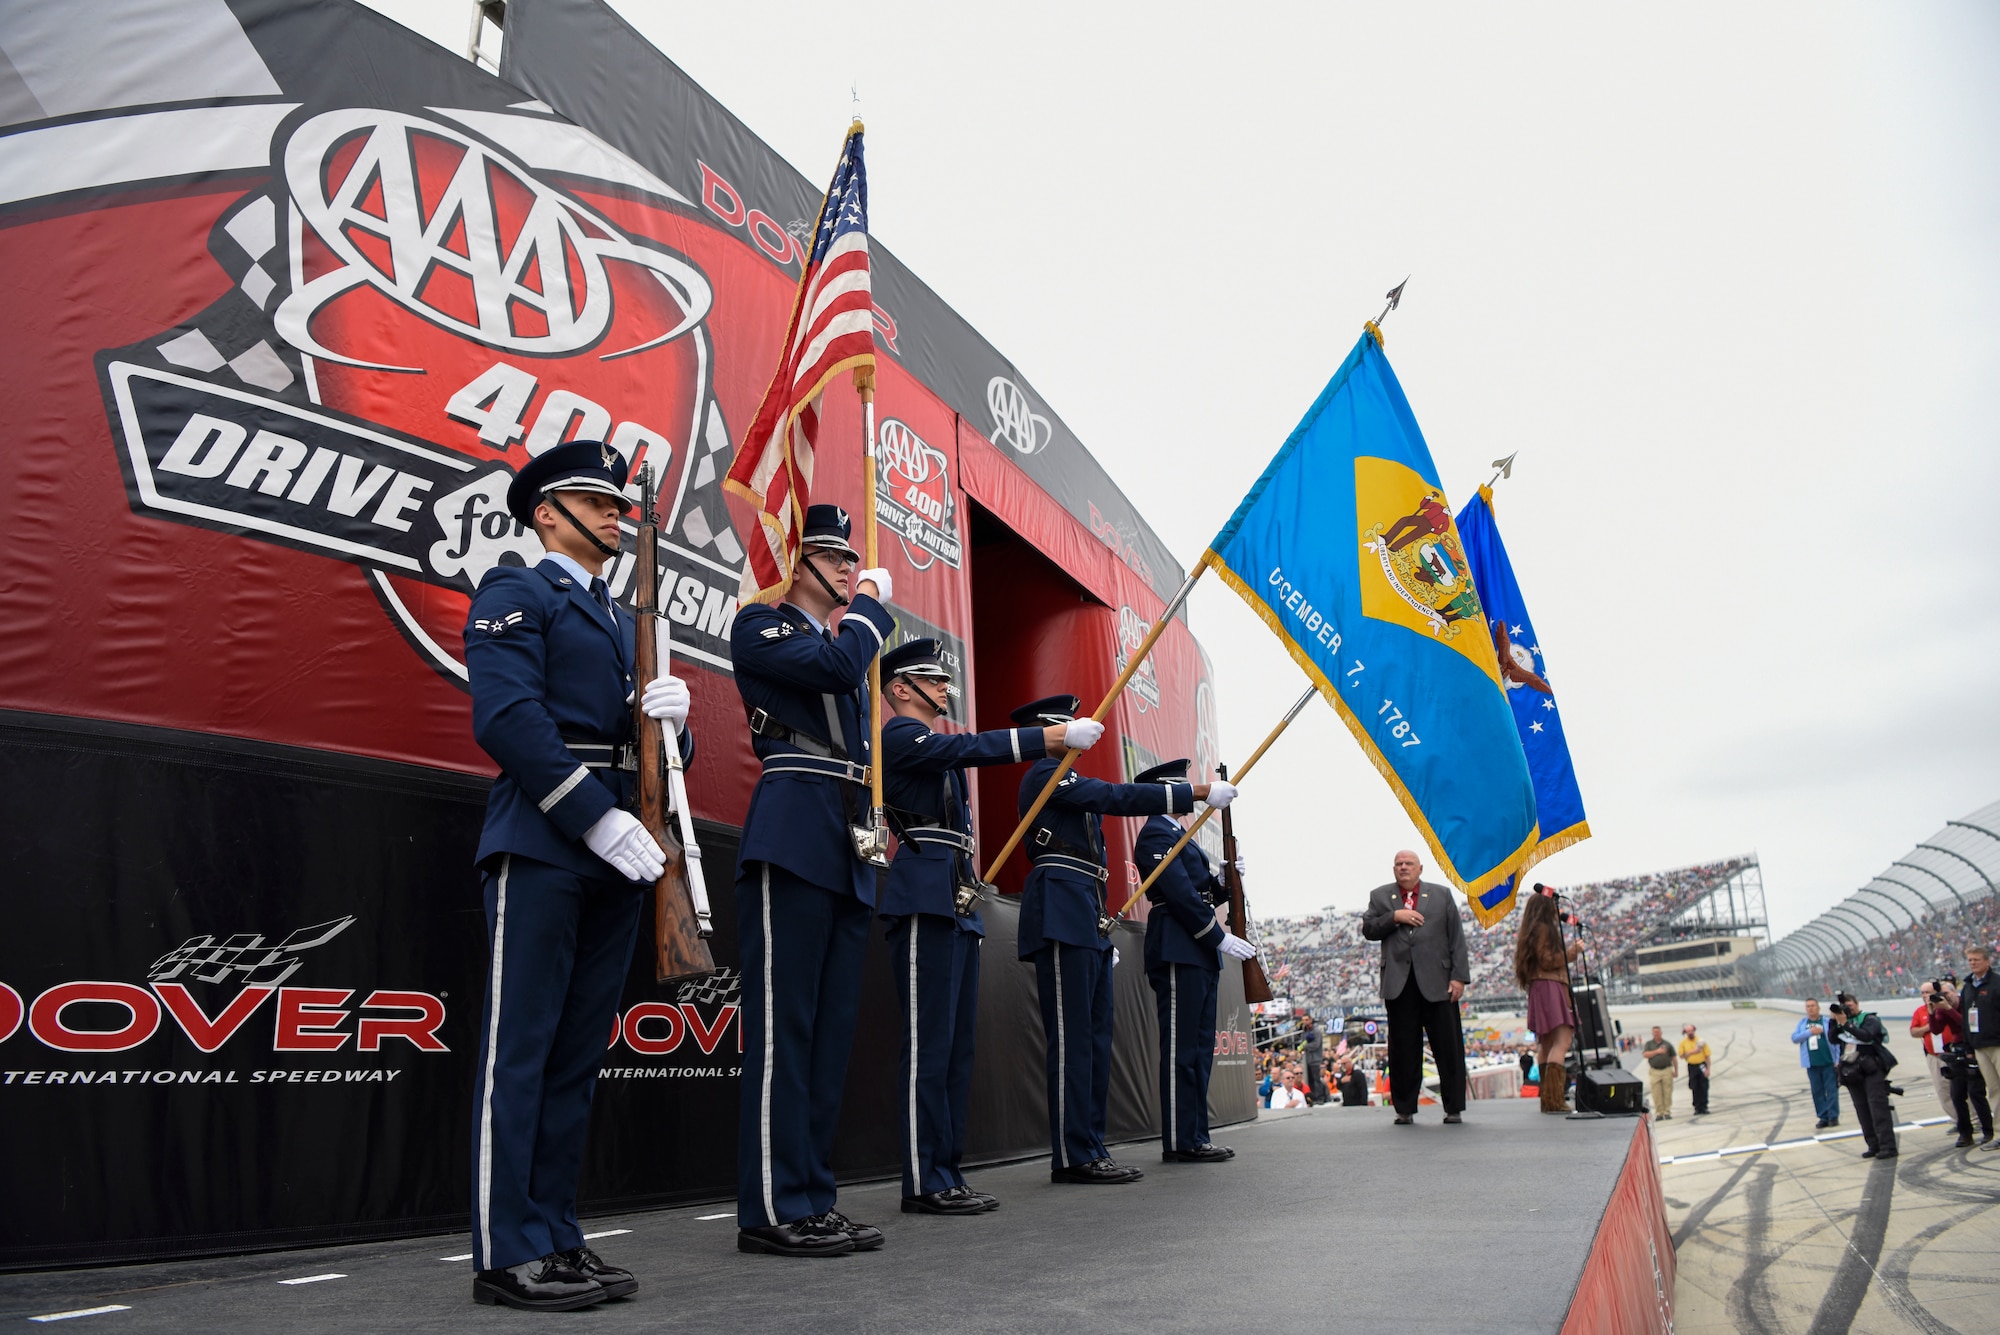 A Dover Air Force Base Honor Guard color guard team presents the colors at the beginning of the “AAA 400 Drive for Autism” Monster Energy NASCAR Cup Series Race May 6, 2018, at Dover International Speedway, Del. American Country music singer Jessica Lynn sang the national anthem and Dan Schafer, pastor of Calvary Assembly of God, Hightstown, N.J., gave the invocation. (U.S. Air Force photo by Airman 1st Class Zoe M. Wockenfuss)